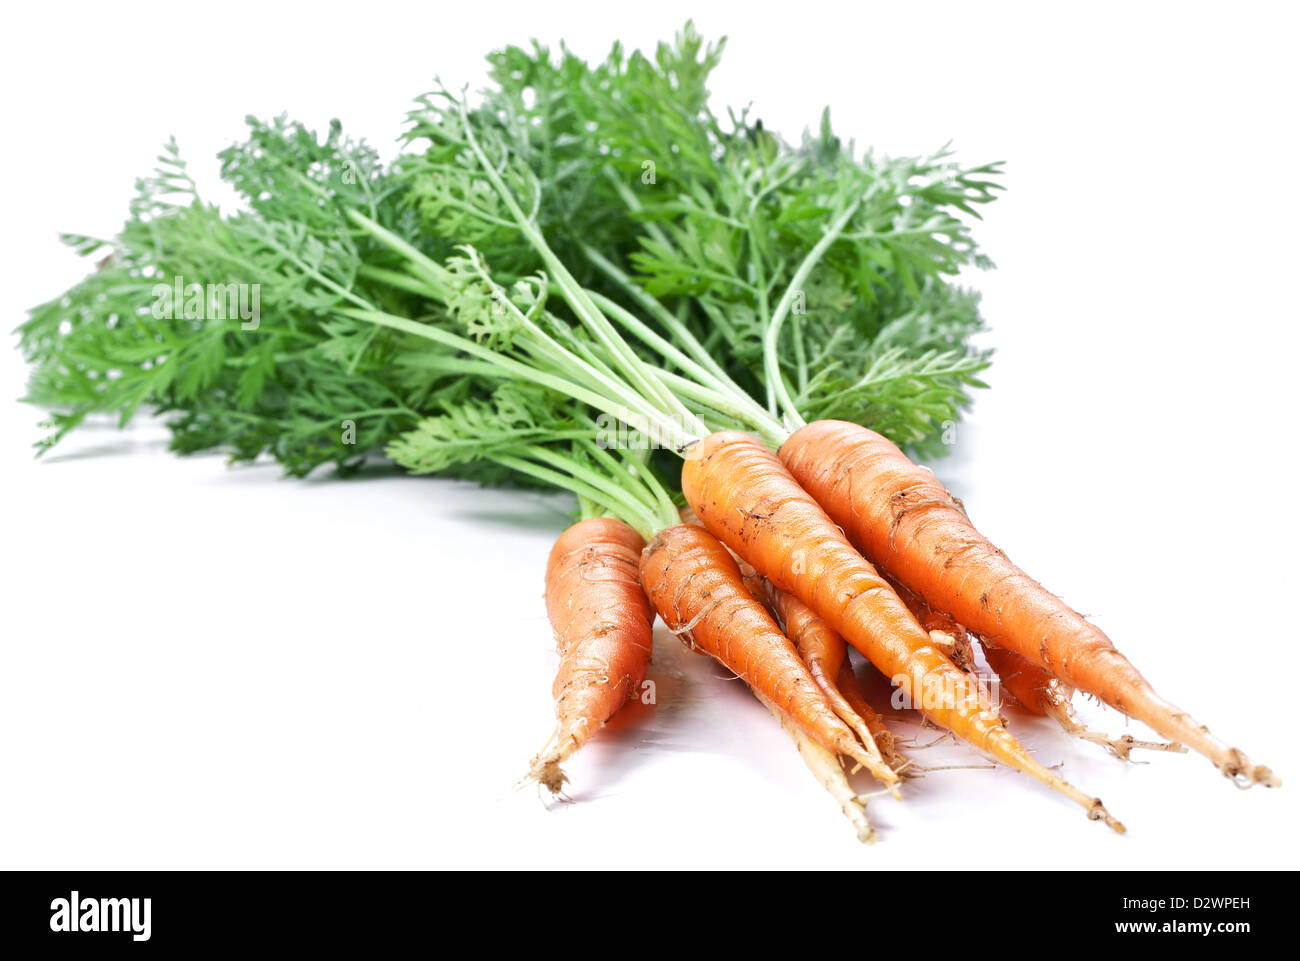 Carrots with leaves on a white background. Stock Photo